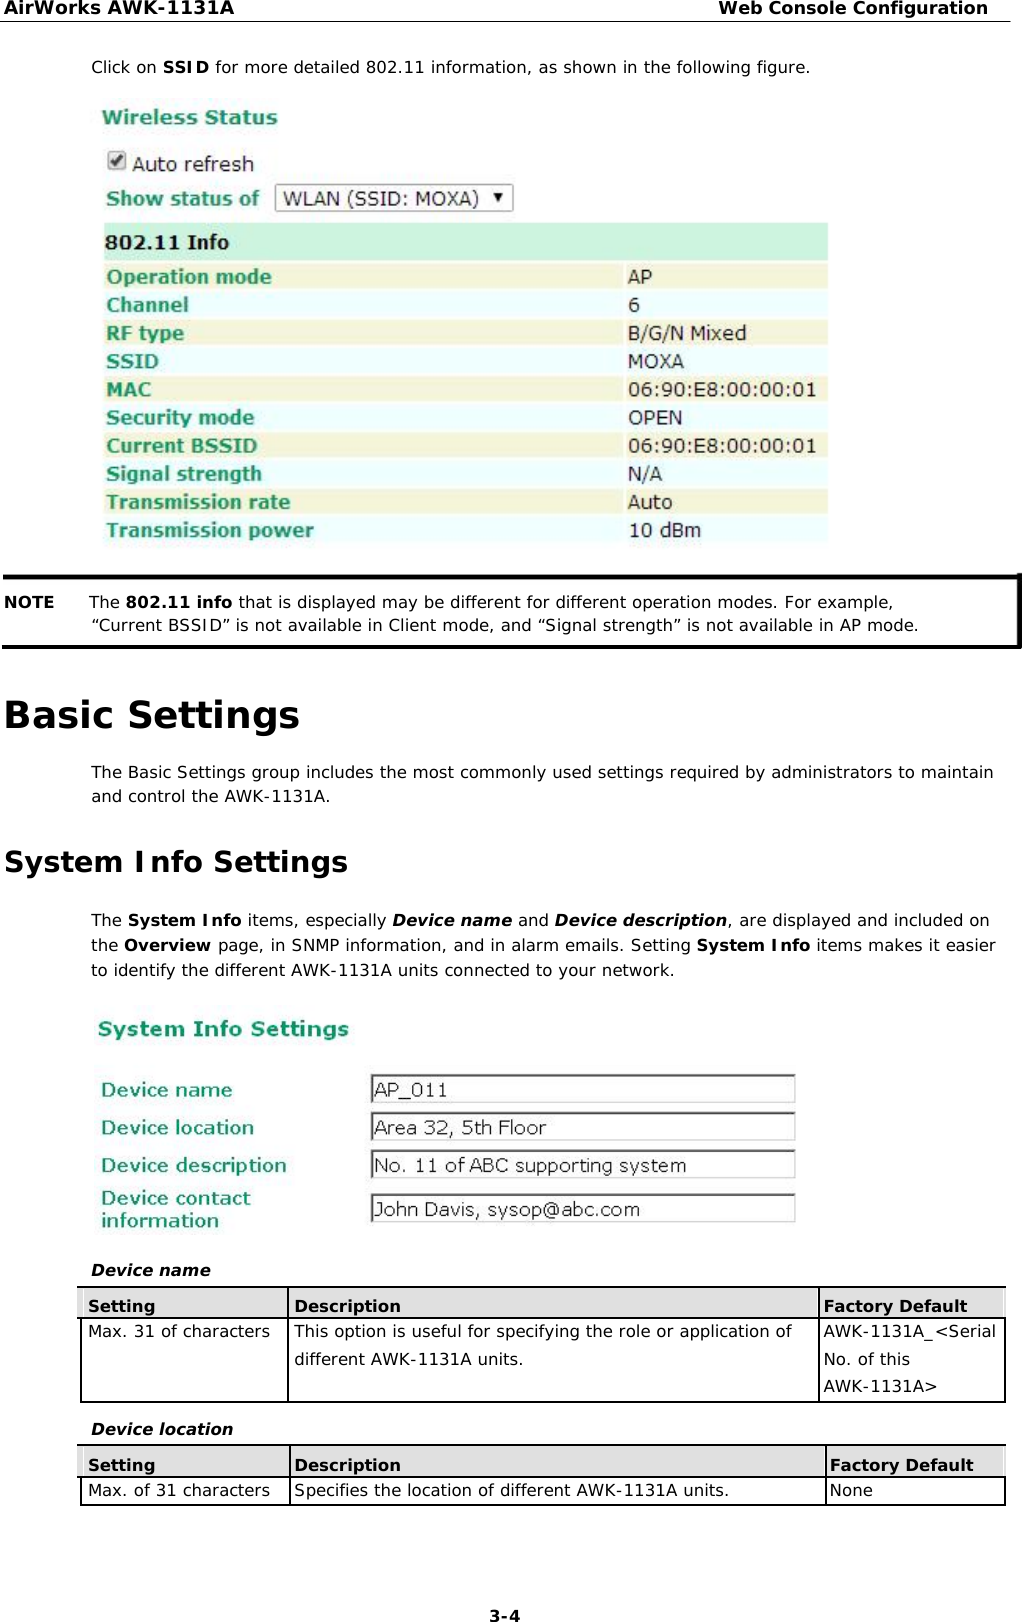 AirWorks AWK-1131A Web Console Configuration  Click on SSID for more detailed 802.11 information, as shown in the following figure.                         NOTE The 802.11 info that is displayed may be different for different operation modes. For example, “Current BSSID” is not available in Client mode, and “Signal strength” is not available in AP mode.   Basic Settings  The Basic Settings group includes the most commonly used settings required by administrators to maintain and control the AWK-1131A.  System Info Settings  The System Info items, especially Device name and Device description, are displayed and included on the Overview page, in SNMP information, and in alarm emails. Setting System Info items makes it easier to identify the different AWK-1131A units connected to your network.              Device name    Setting Description Factory Default   Max. 31 of characters This option is useful for specifying the role or application of AWK-1131A_&lt;Serial    different AWK-1131A units. No. of this      AWK-1131A&gt;        Device location    Setting Description Factory Default   Max. of 31 characters Specifies the location of different AWK-1131A units. None            3-4 